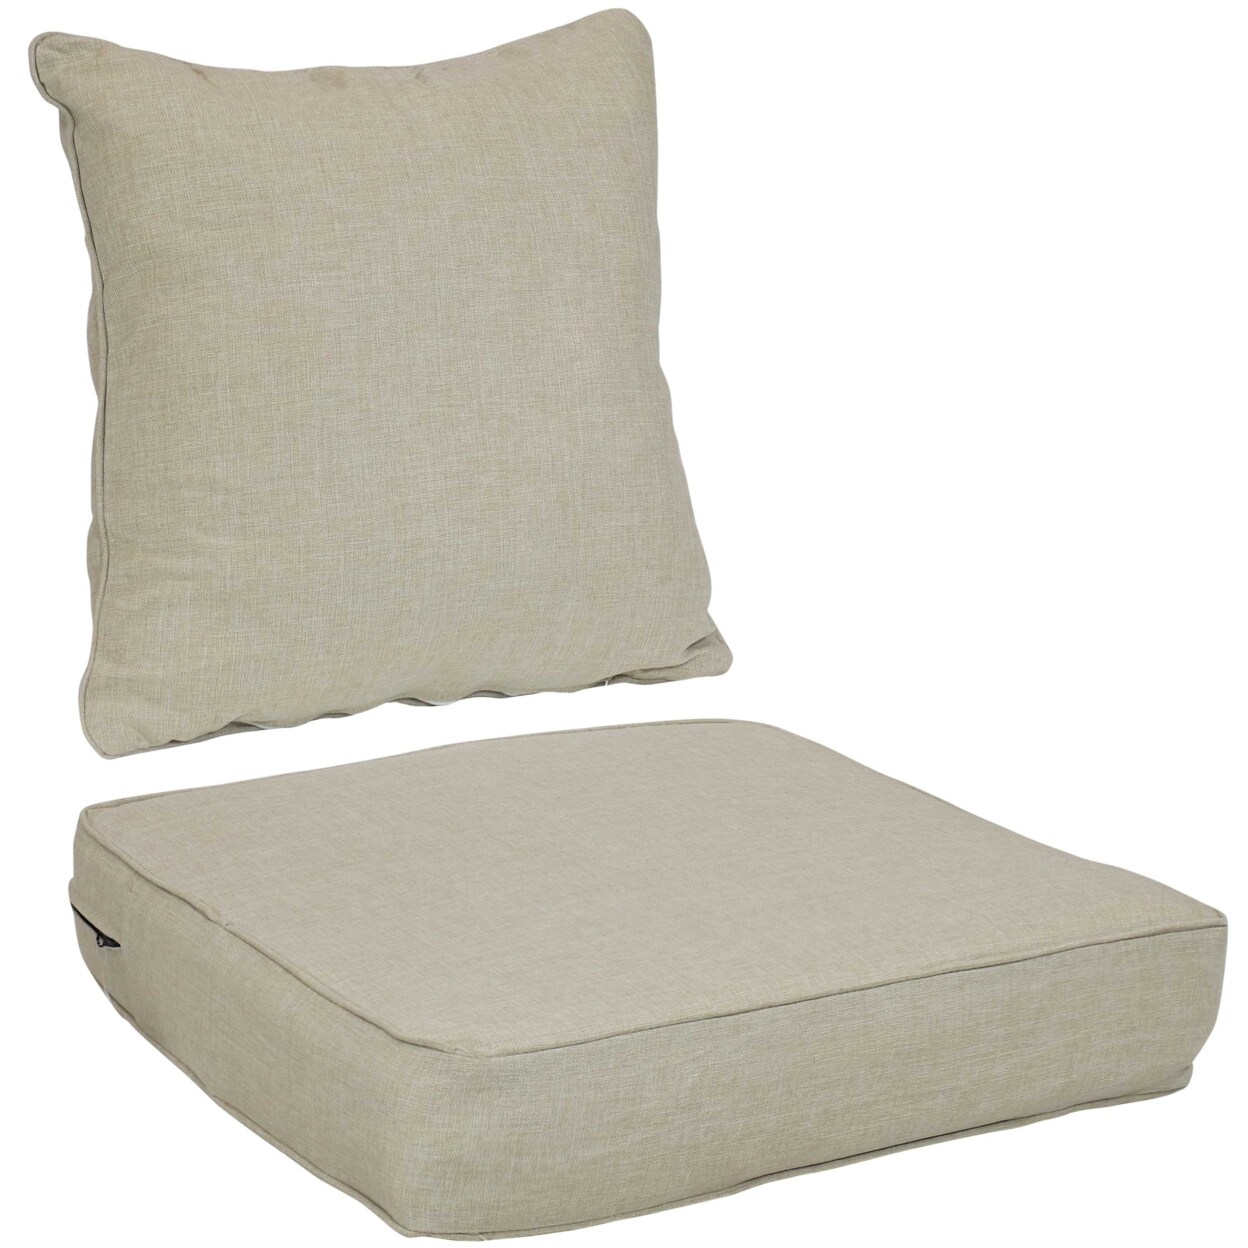 Sunnydaze   Indoor/Outdoor Polyester Back and Seat Cushions - Beige